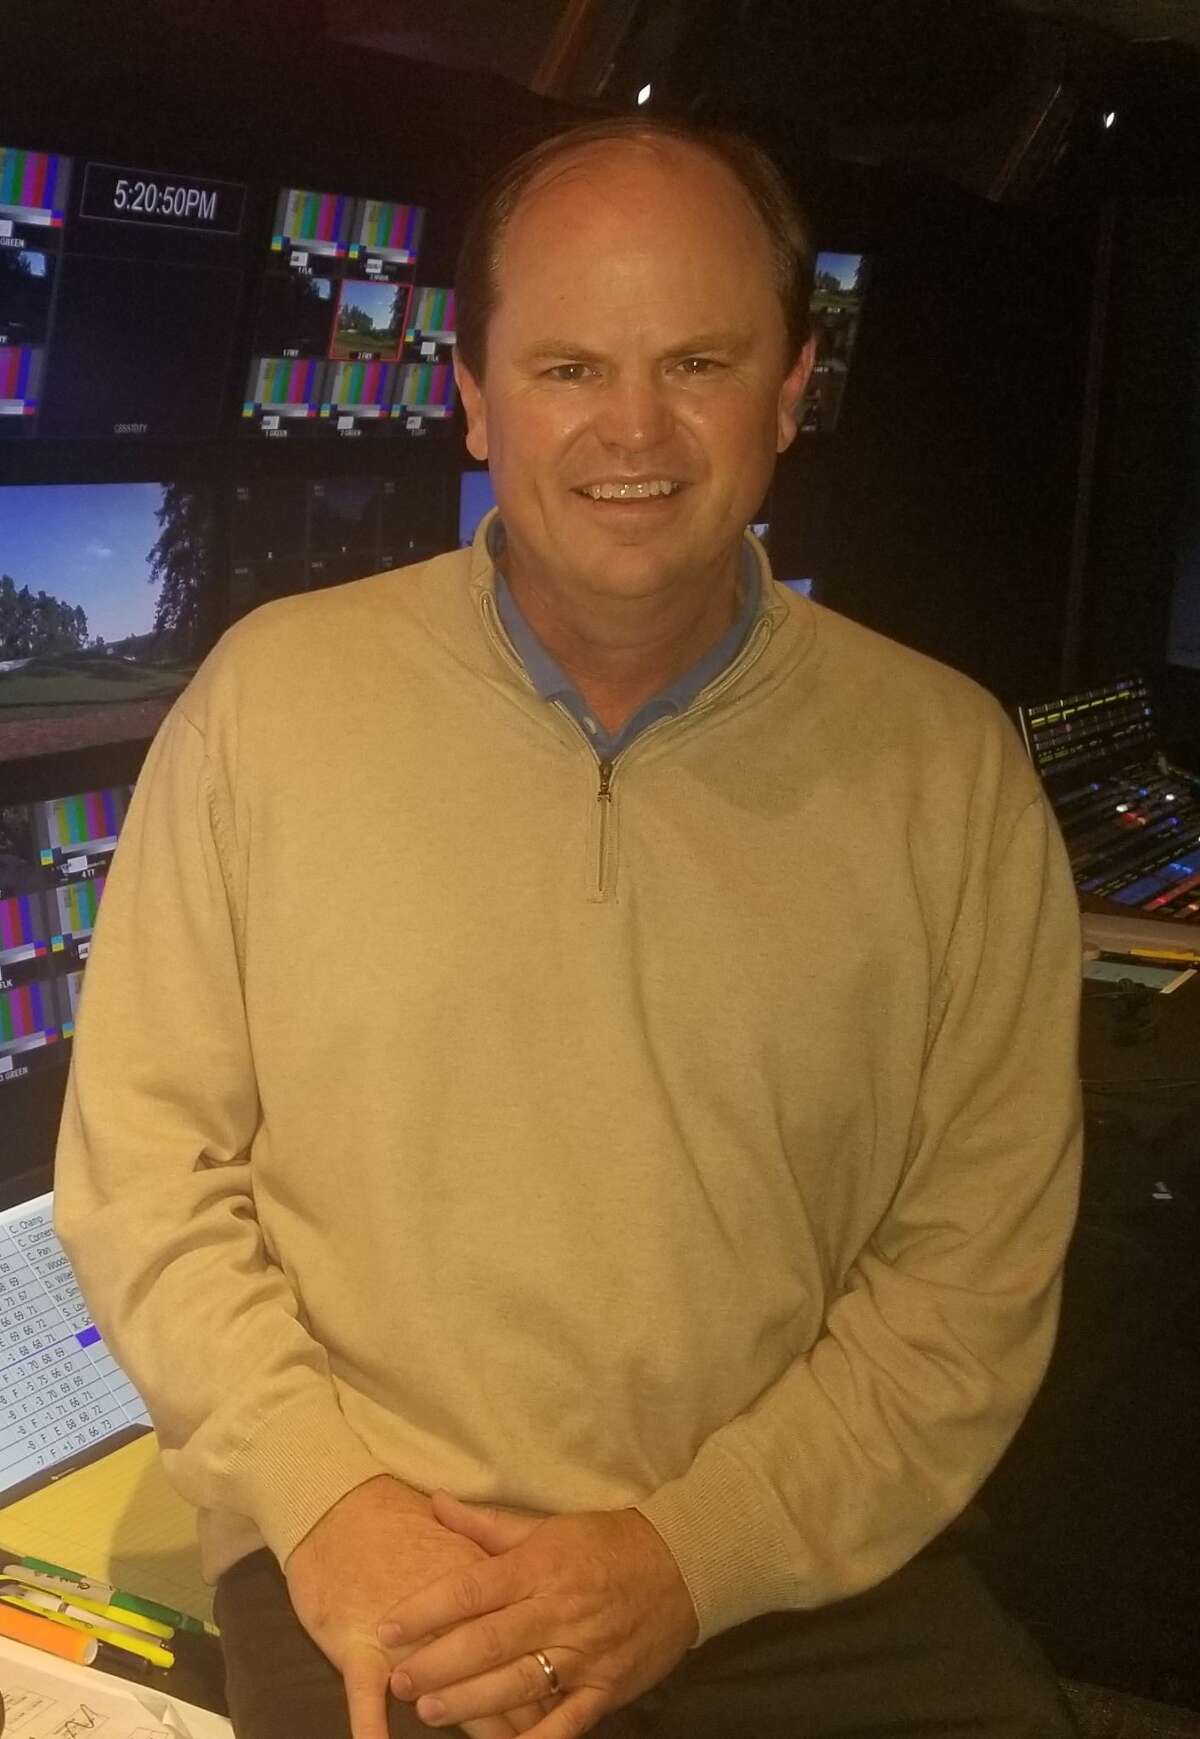 Sellers Shy is the news CBS Sports coordinating producer of golf. Shy joined CBS Sports in 1997.